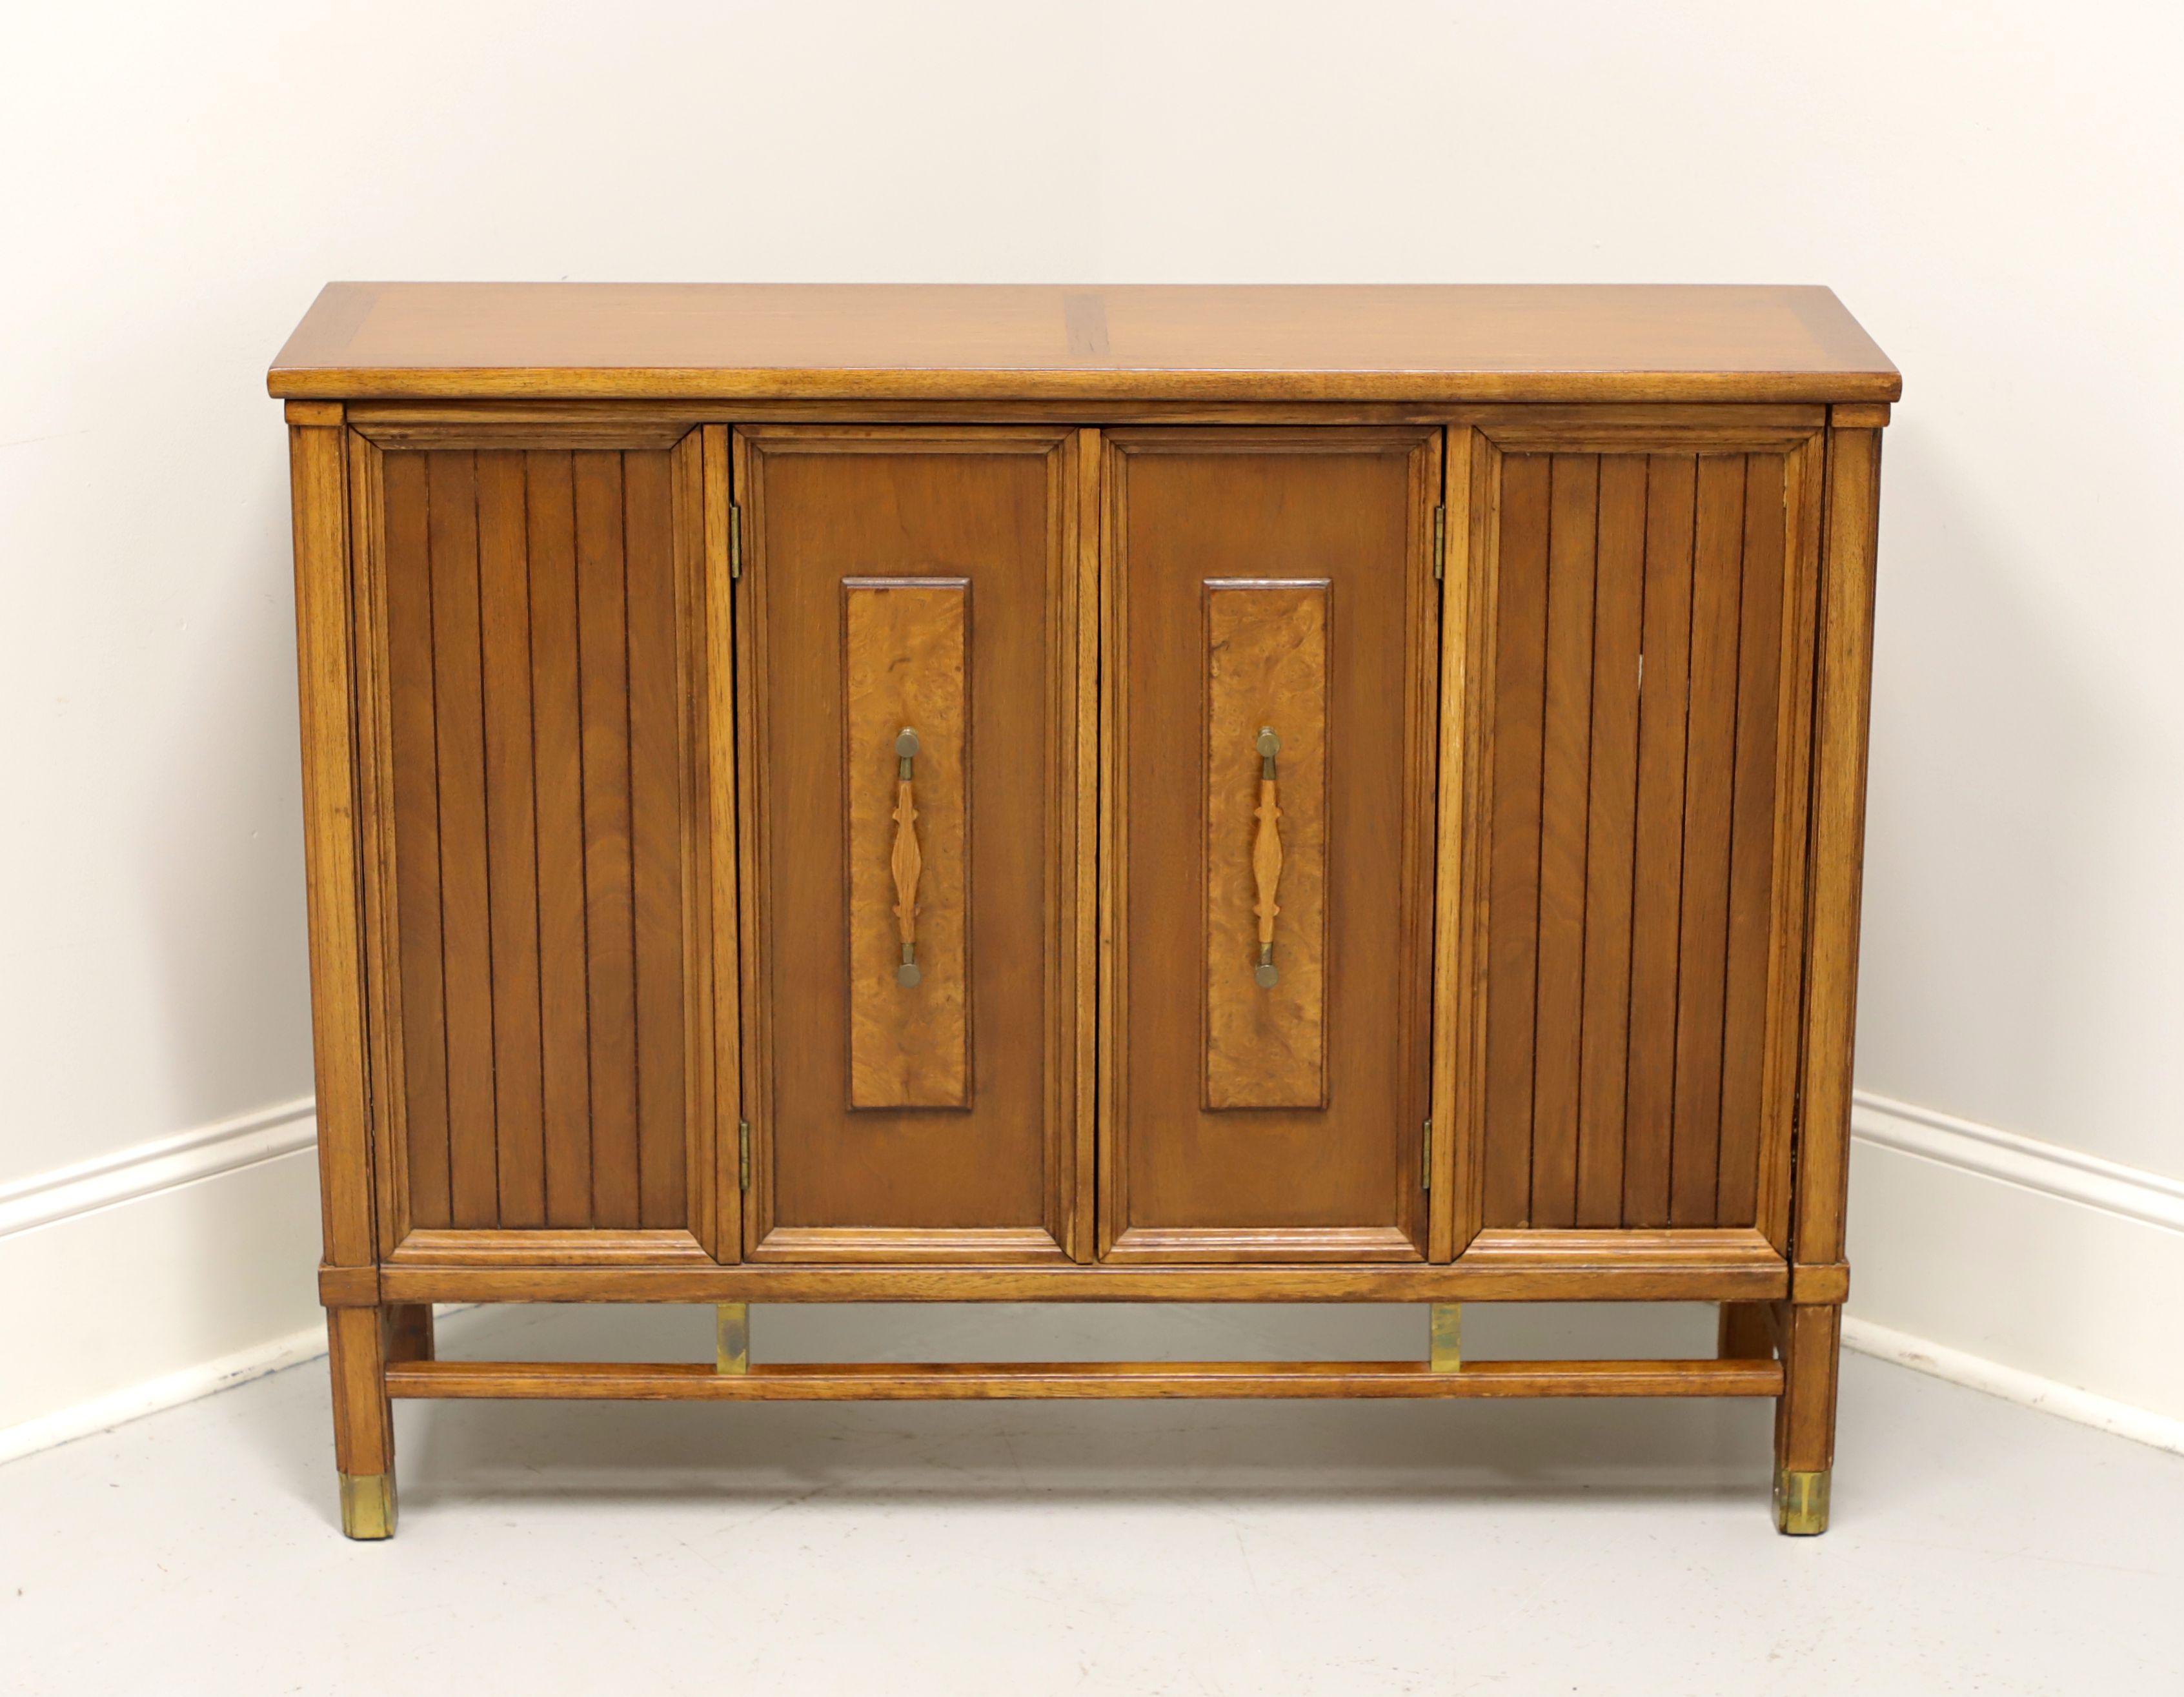 A mid 20th century modern narrow console cabinet, unbranded, similar quality to Century or Drexel. Walnut, burl to door fronts, with brass hardware and accents. Features a two door cabinet revealing a storage area with one fixed wood shelf. Made in